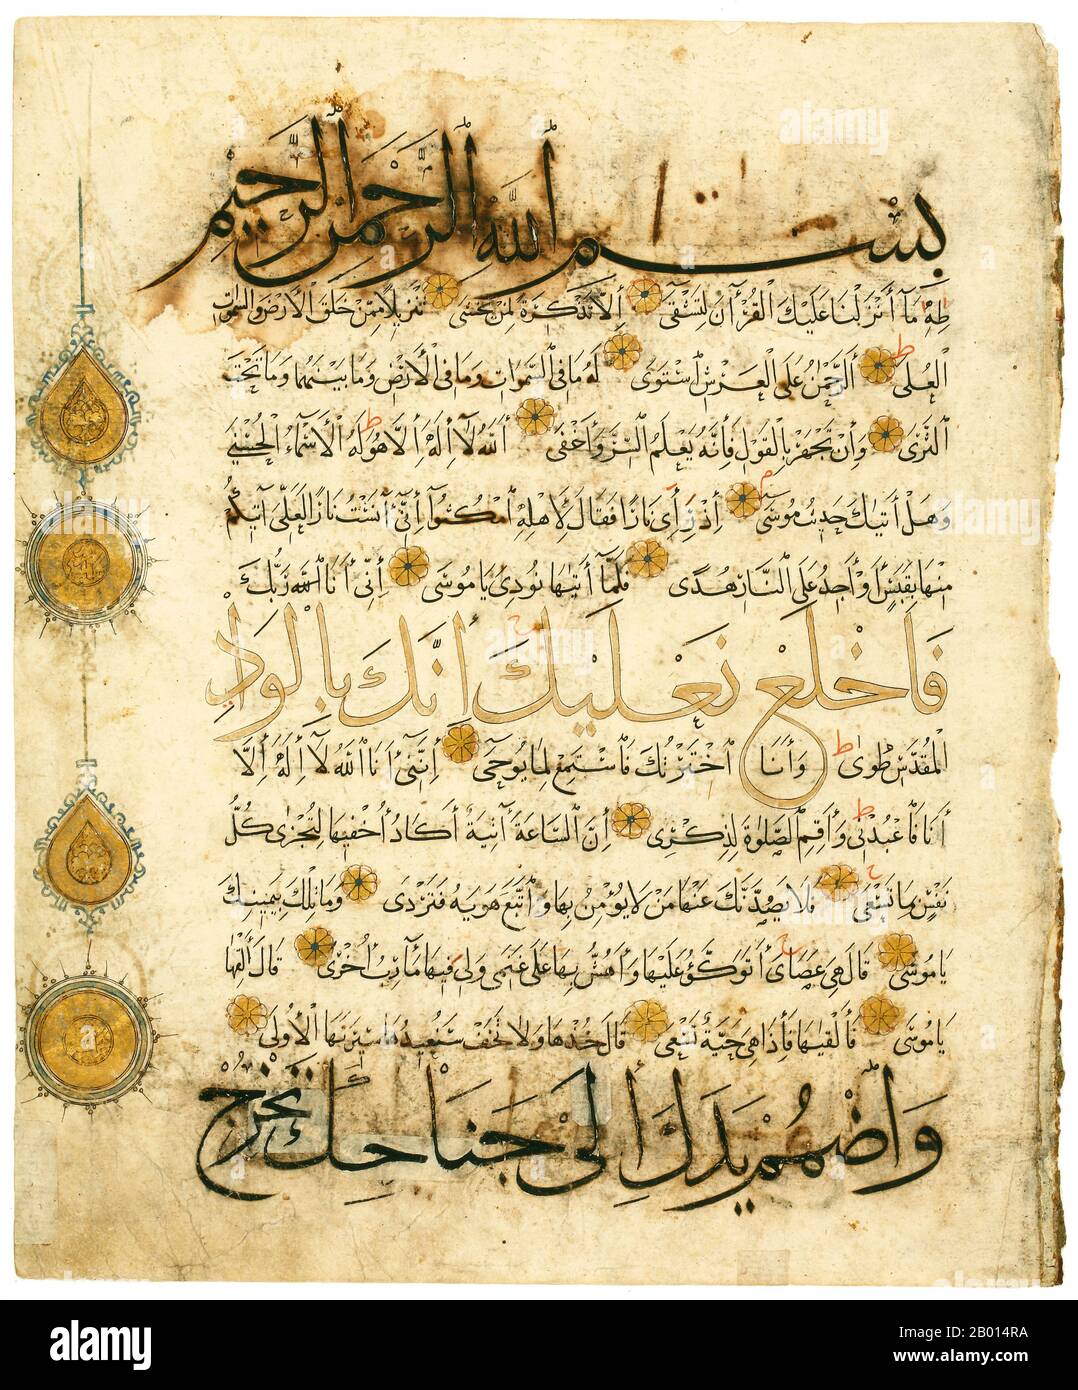 Yemen: Leaf from a Qur'an featuring four types of script, 14th century.  Unusually, this leaf from a Qur'an exhibits four different types of script. Eastern Kufi is used for the framed, illuminated chapter heading for sura 20 and the round markers for each tenth verse. In additioni Naskh is used for the main text; Muhaqqaq is used in the black lines contoured with gold; and Thuluth is used for the golden centre lines. Stock Photo